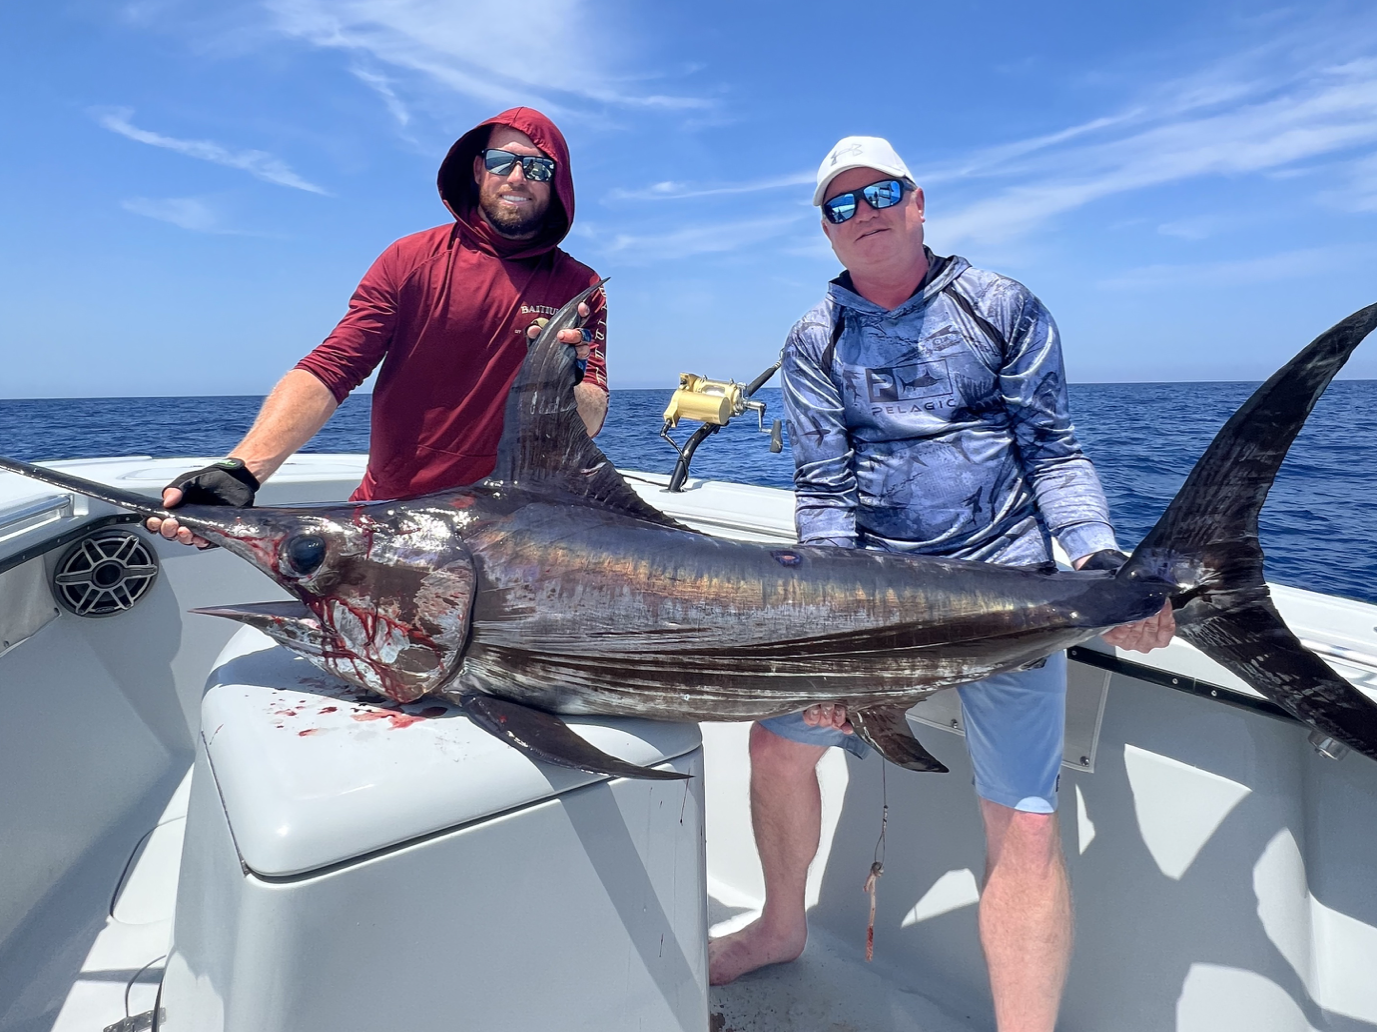 A charter captain and client proudly holding a swordfish catch while on a fishing charter in the Florida Keys, showcasing their successful and thrilling fishing experience in the beautiful coastal waters.